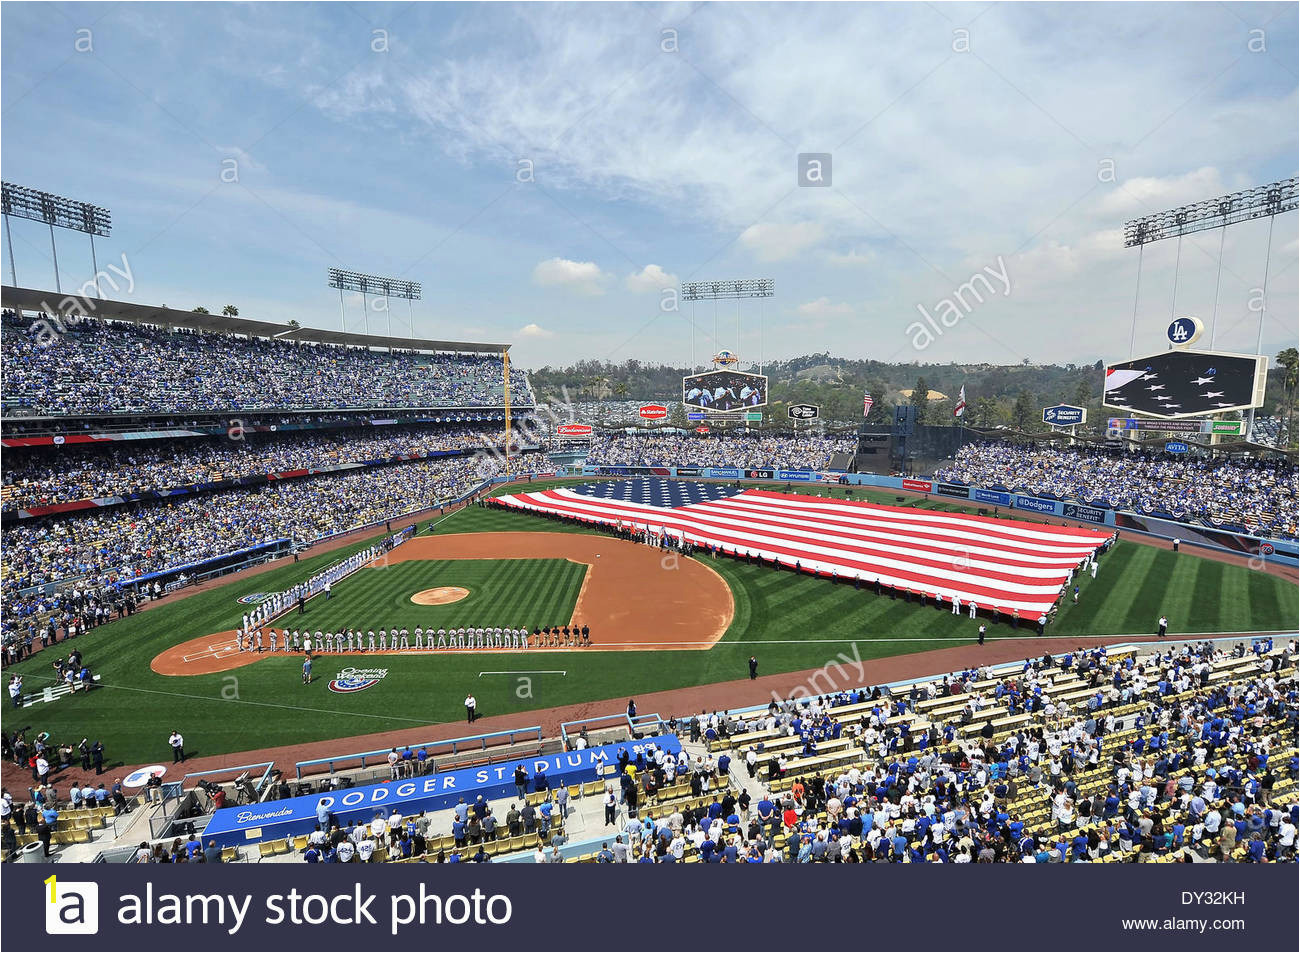 Dodger Stadium Wall Mural Los Angeles Ca Usa 4th Apr 2014 Opening Ceremonies before the